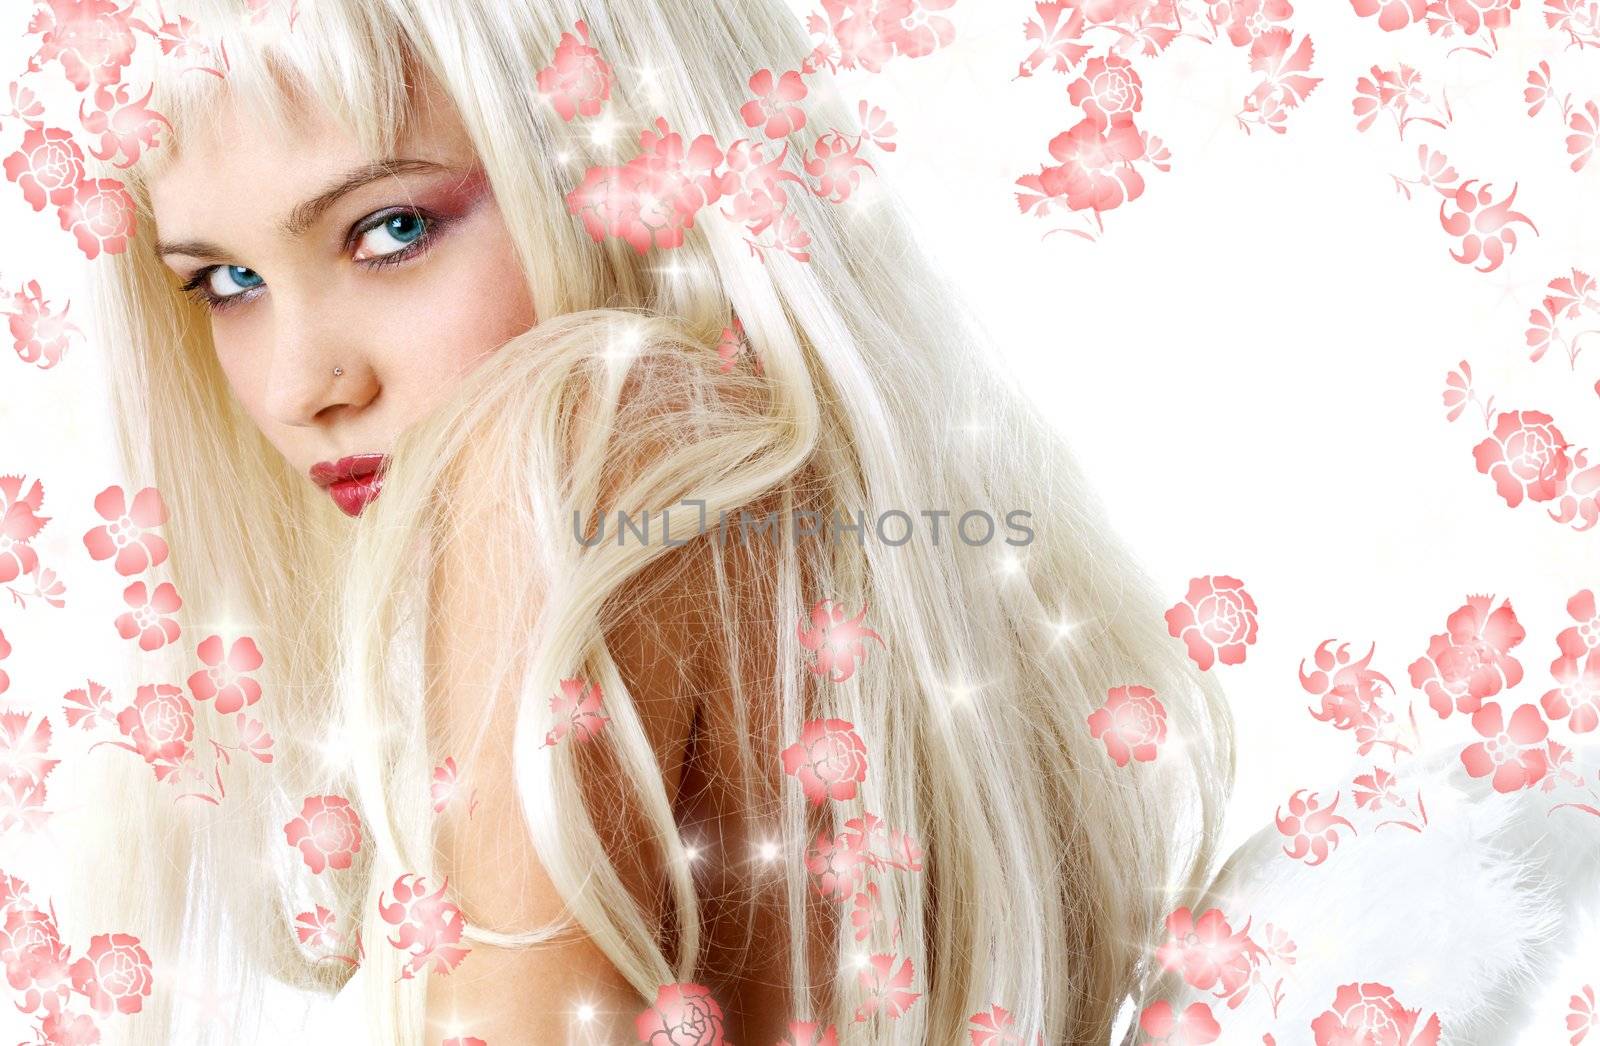 portrait of lovely blond with angel wings surrounded by rendered flowers